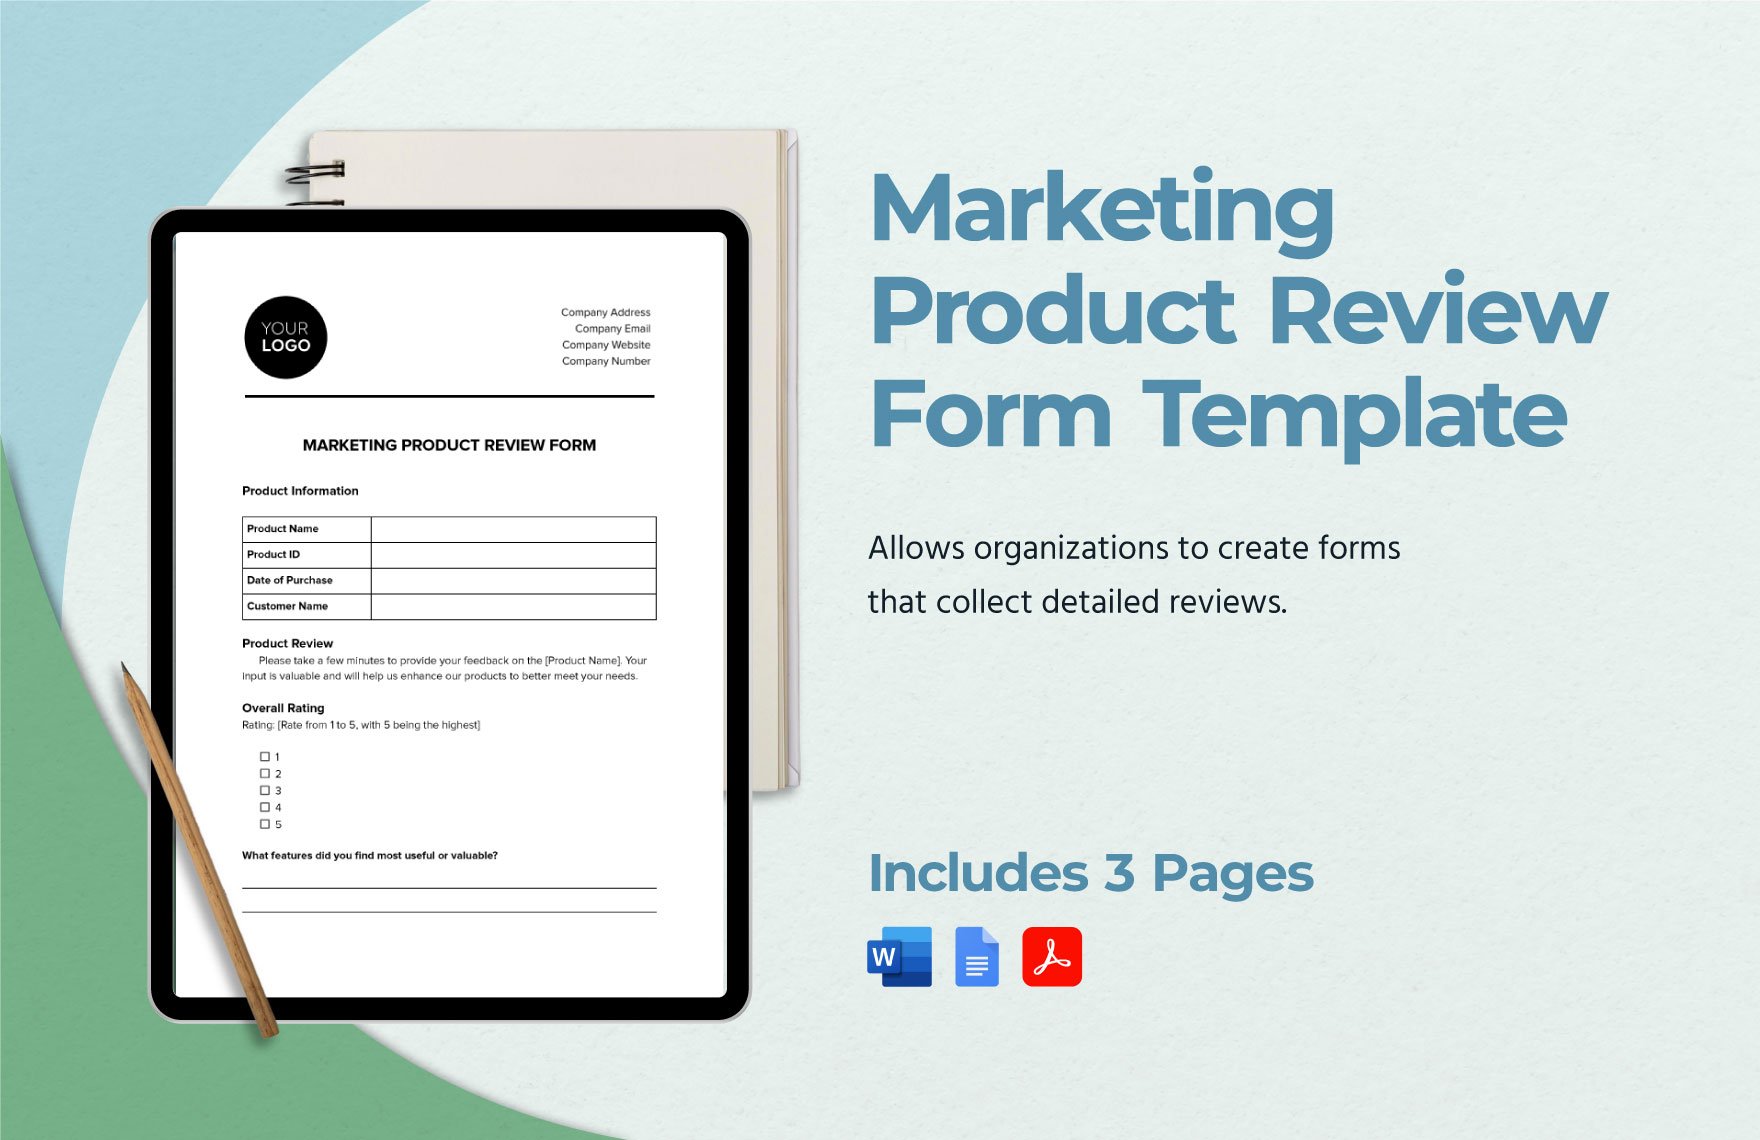 Marketing Product Review Form Template